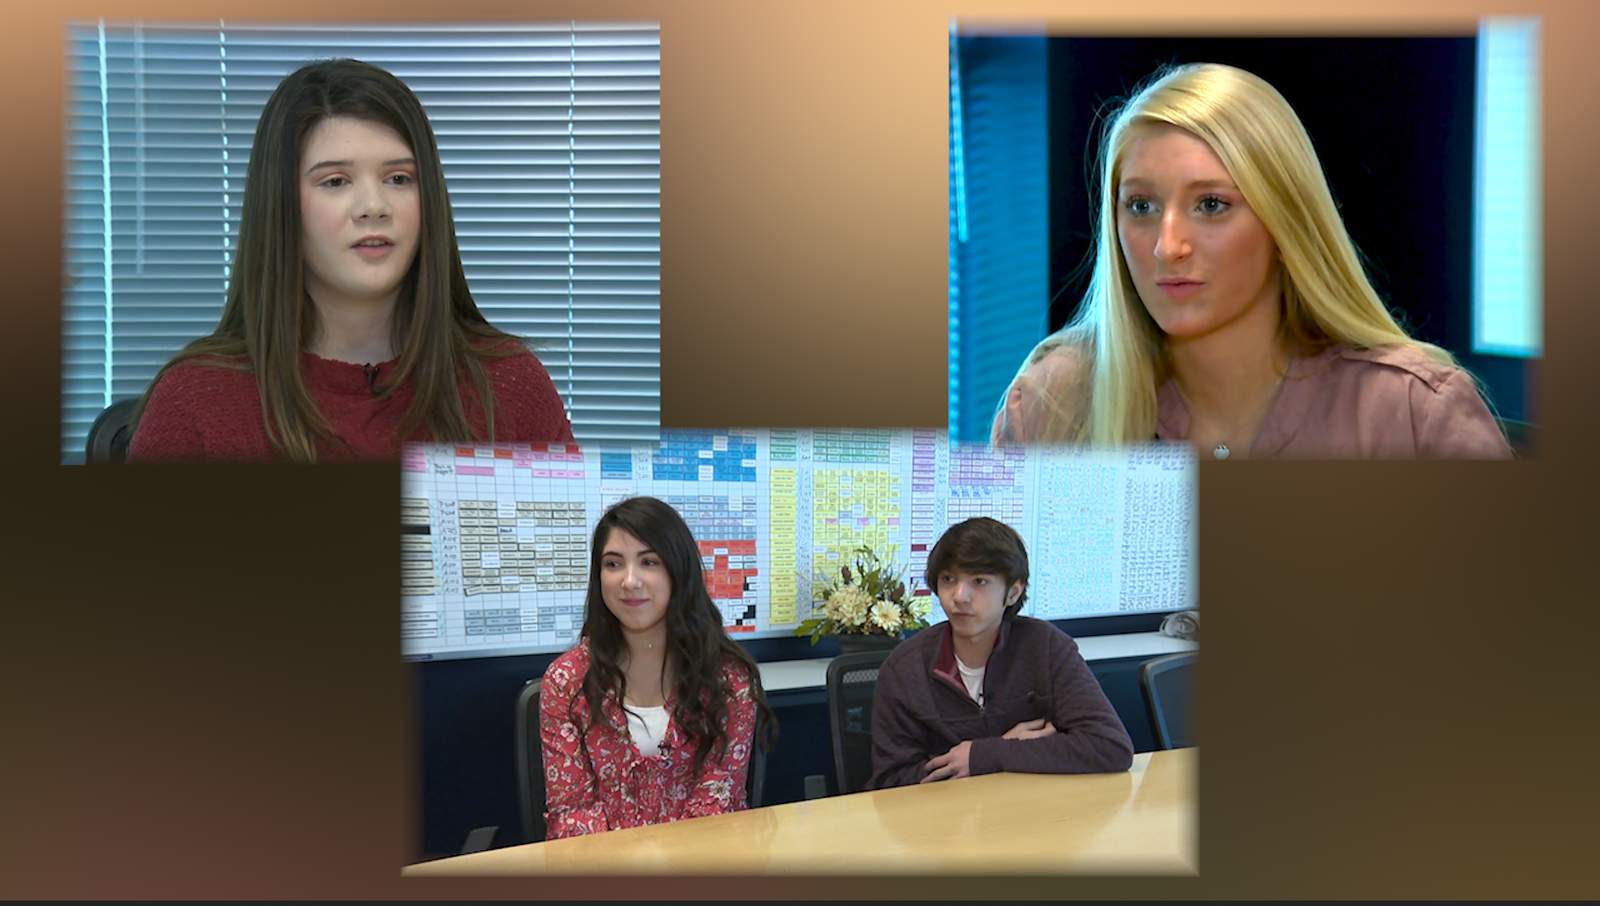 Meet 4 Smithson Valley High School students who are doing good with their passions